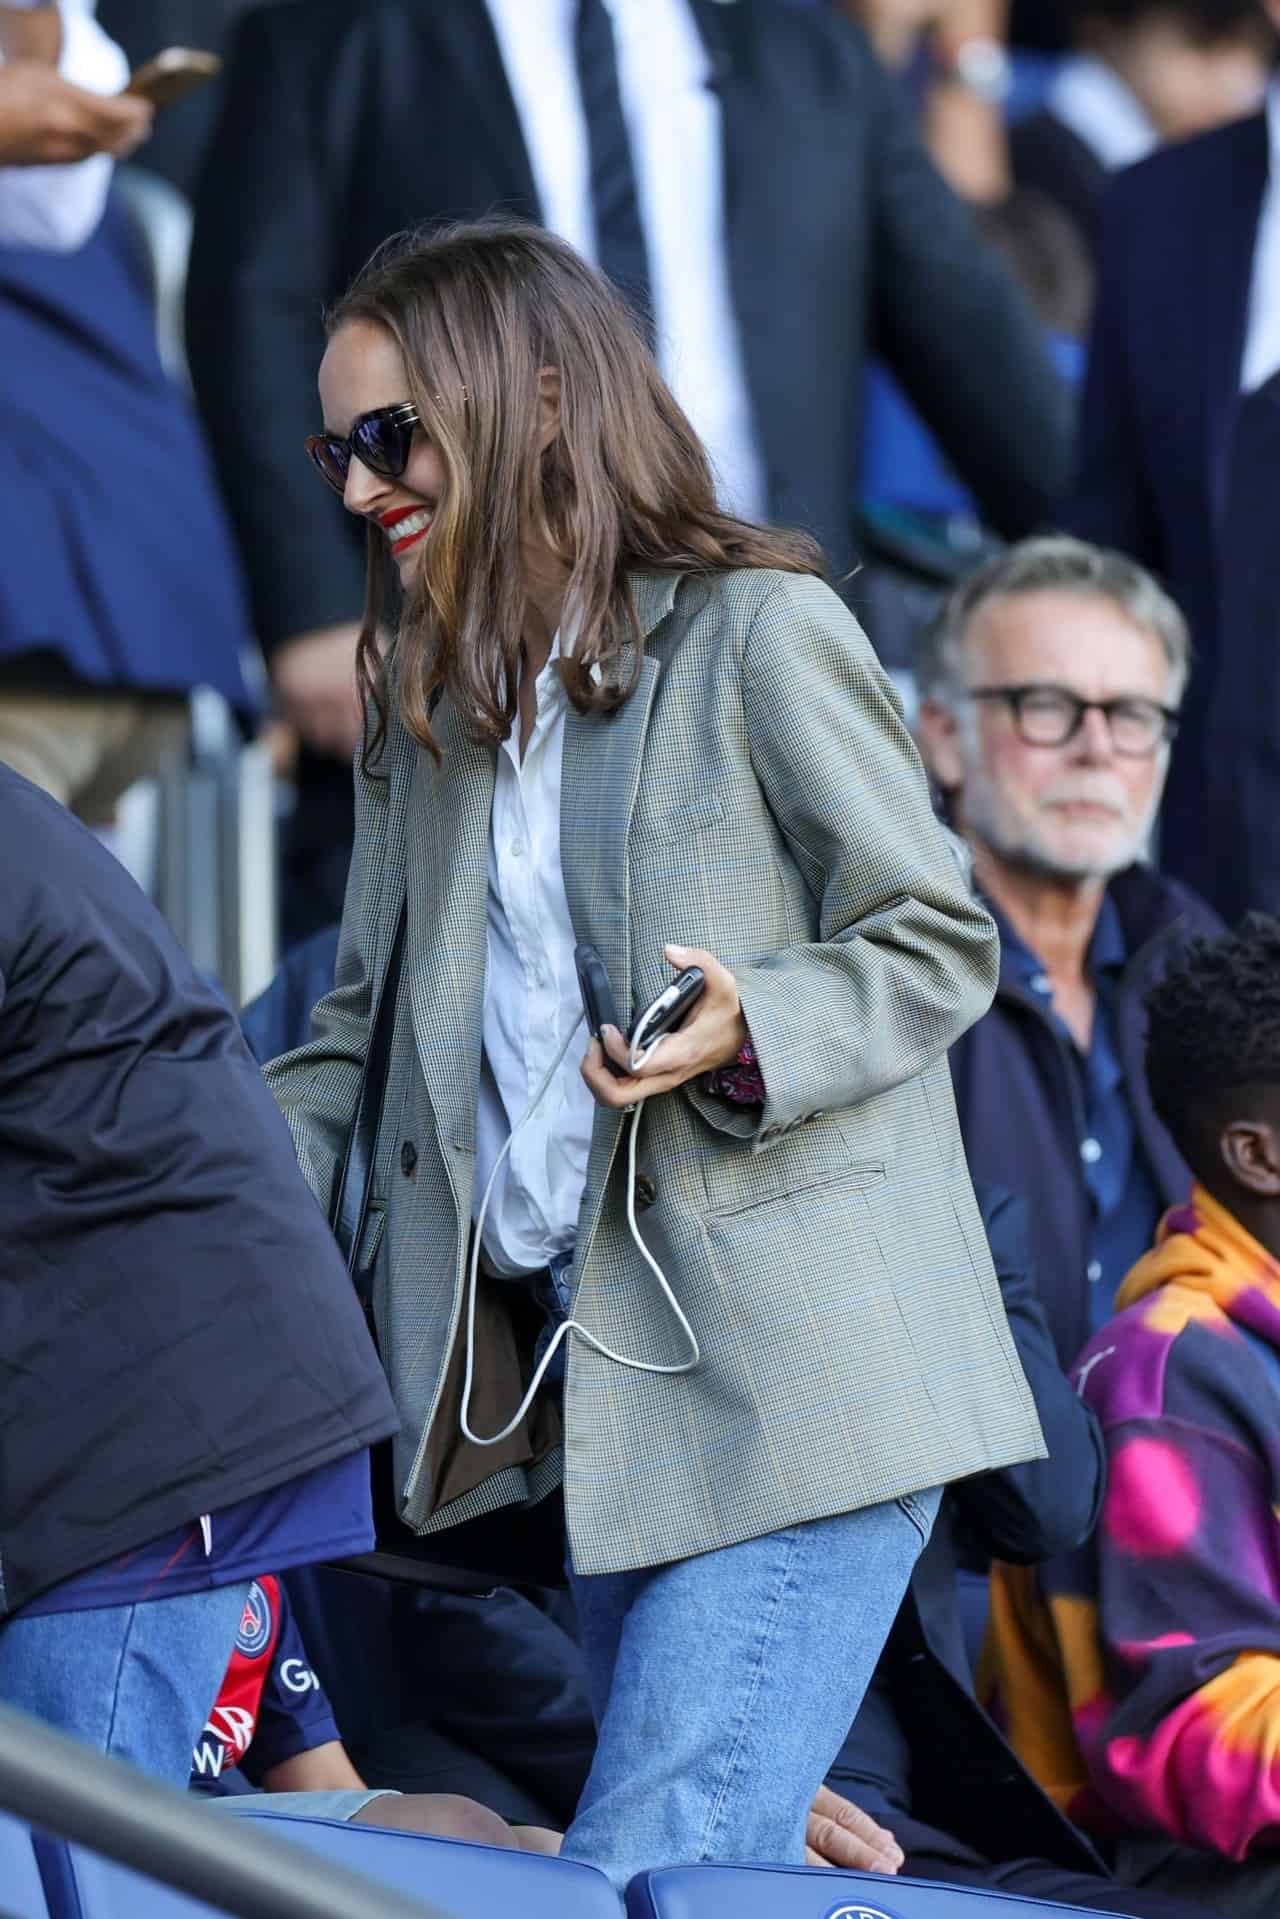 Natalie Portman Suits Up in Blazer and Jeans at Ligue 1 Match in Paris